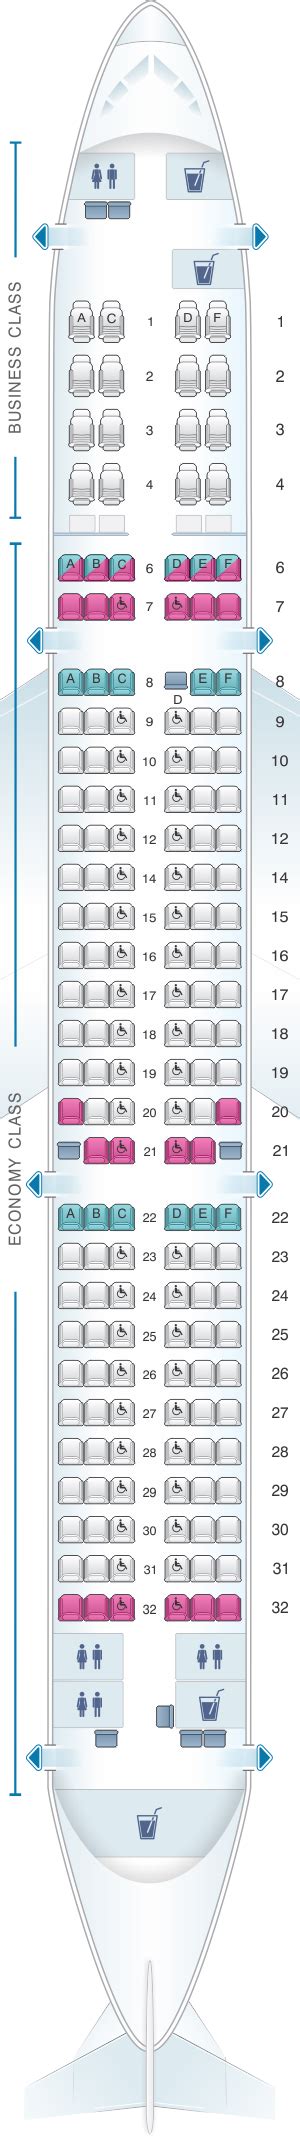 Airbus A321 231 Seats